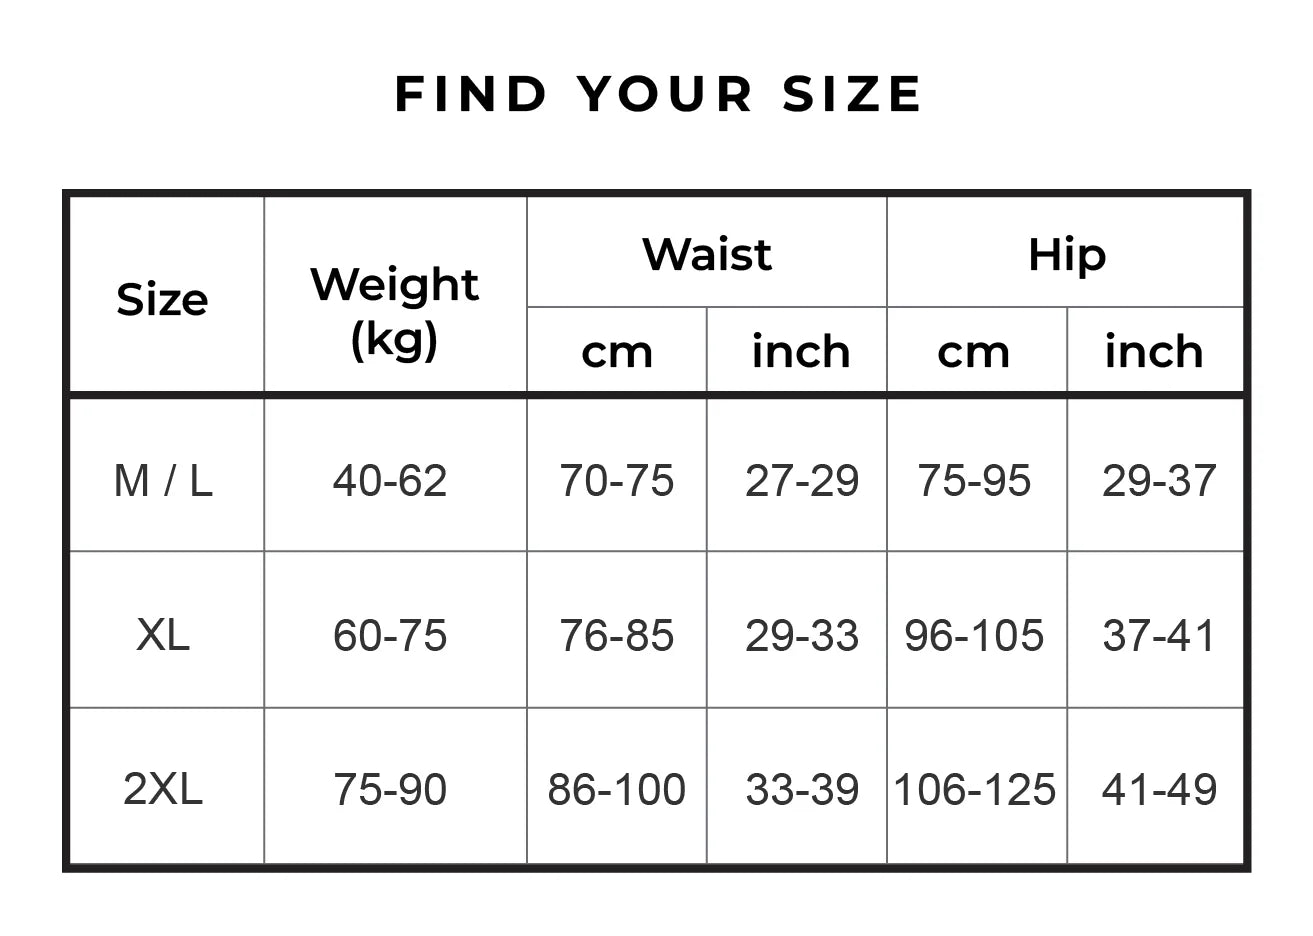 Find Your Size chart for Chantelle's Secret panties, detailing sizes M/L to 2XL with corresponding weight, waist, and hip measurements in cm and inches.